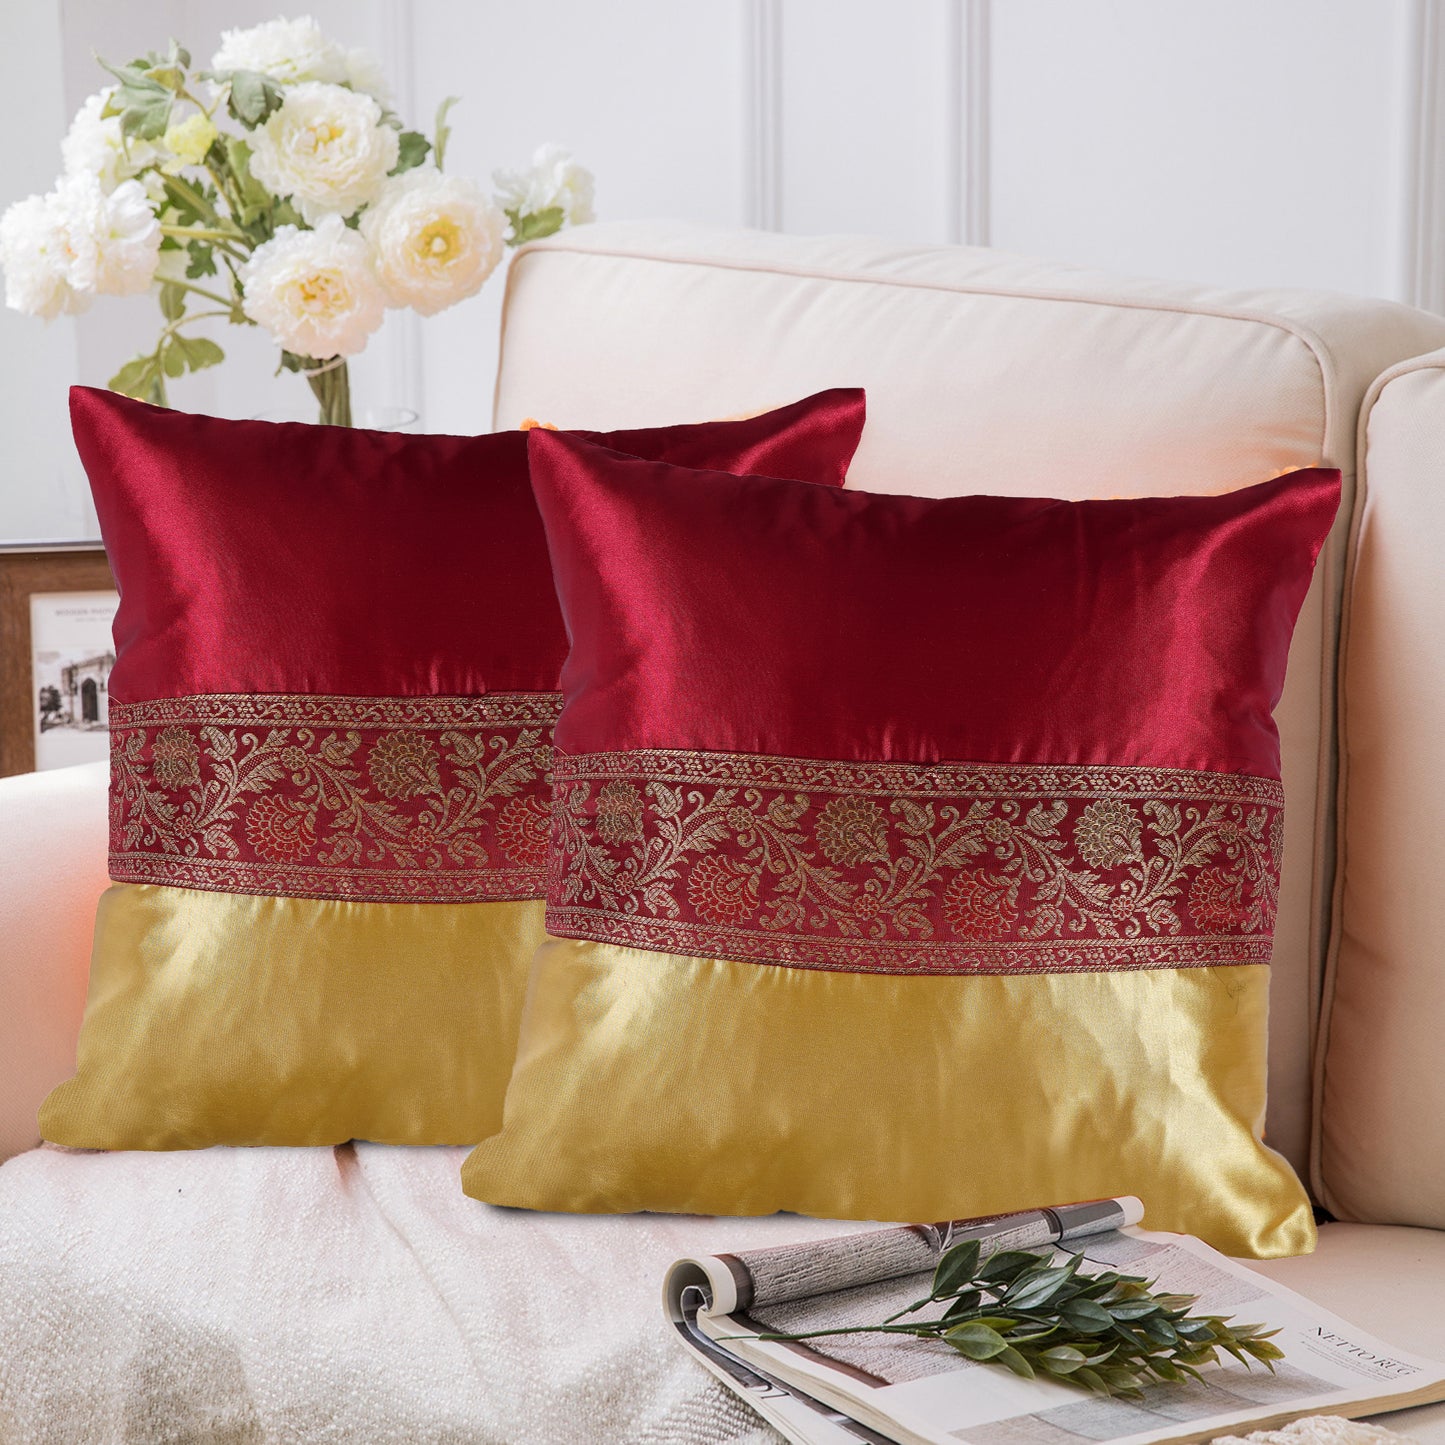 Set of 2 Pc Indian Solid Soft Silky Satin Yellow & Maroon Cushion Covers Square Throw Decorative Pillowcases for Couch Sofa Home Décor 16X16 In